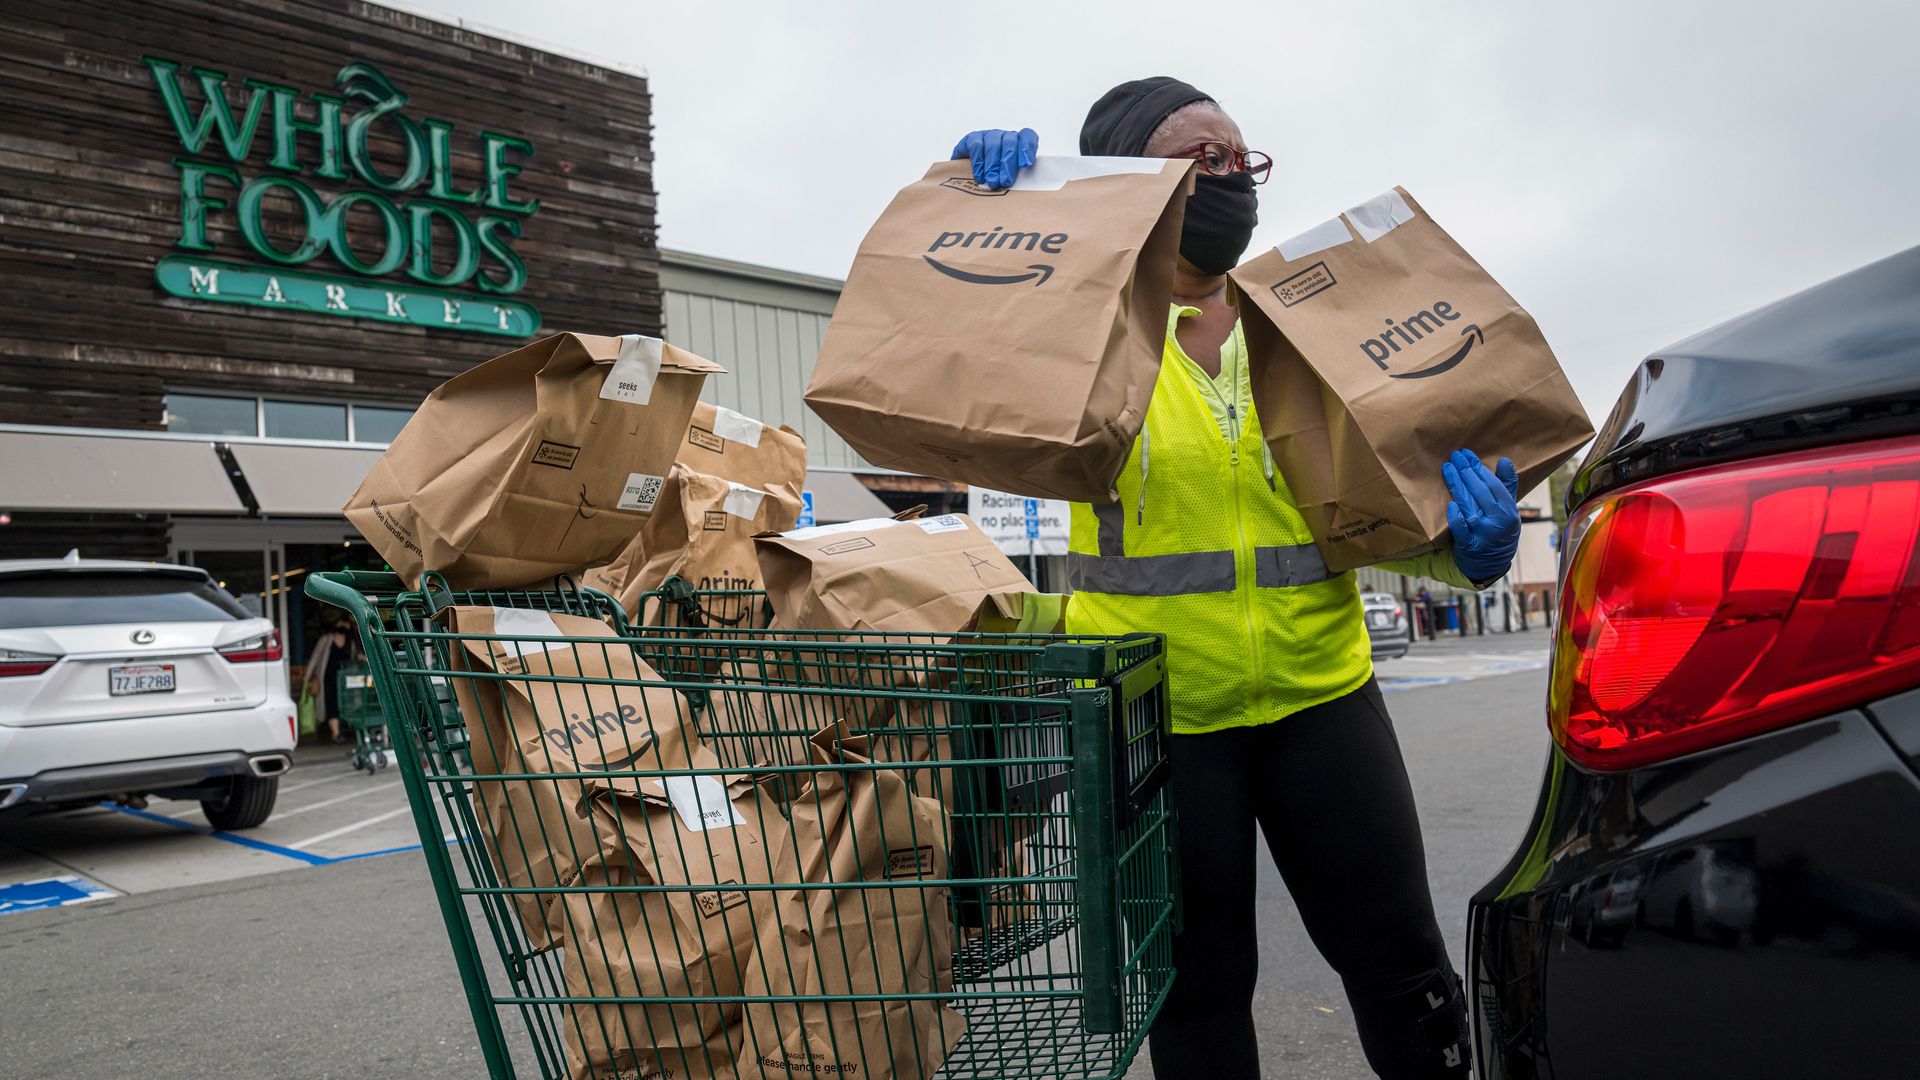 A woman loads Amazon Prime grocery bags into a car outside of a Whole Foods store.